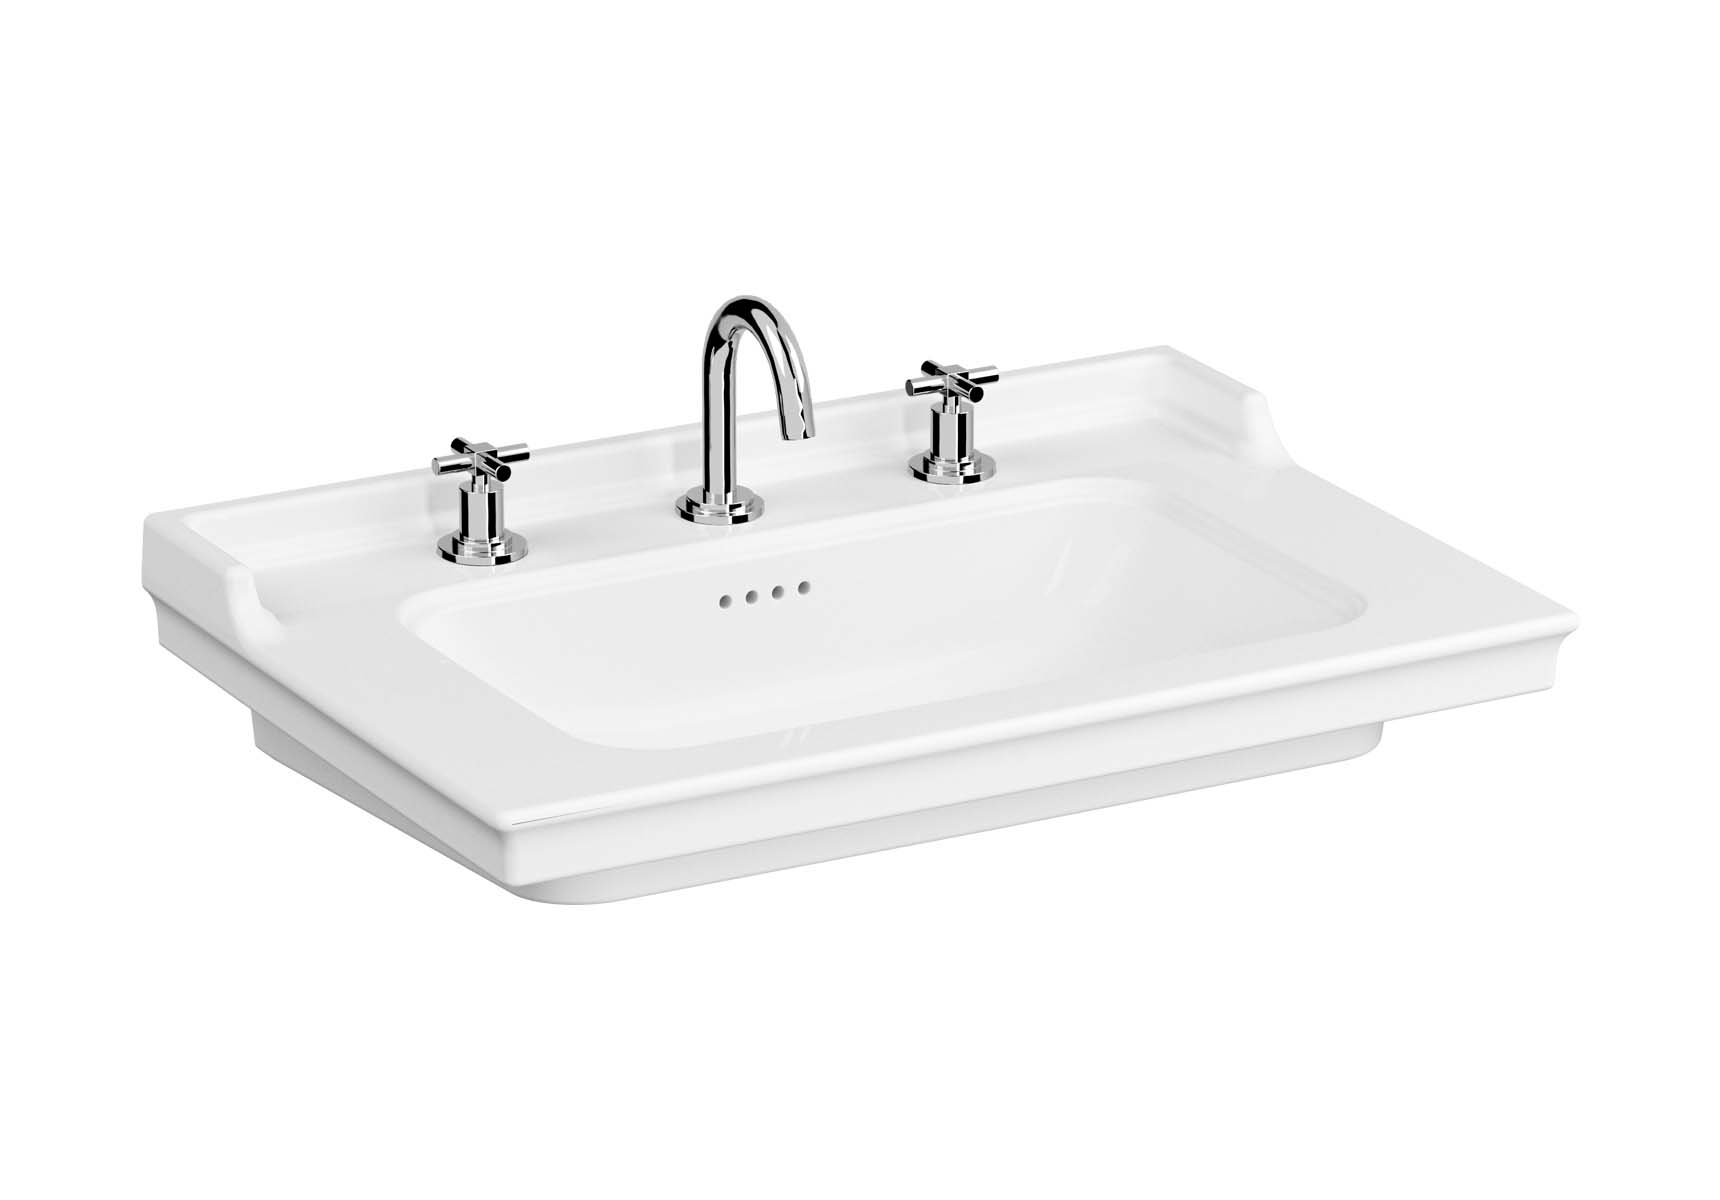 Vanity Basin, 80 cm, One Tap Hole, With Overflow Hole, With Metallic Legs